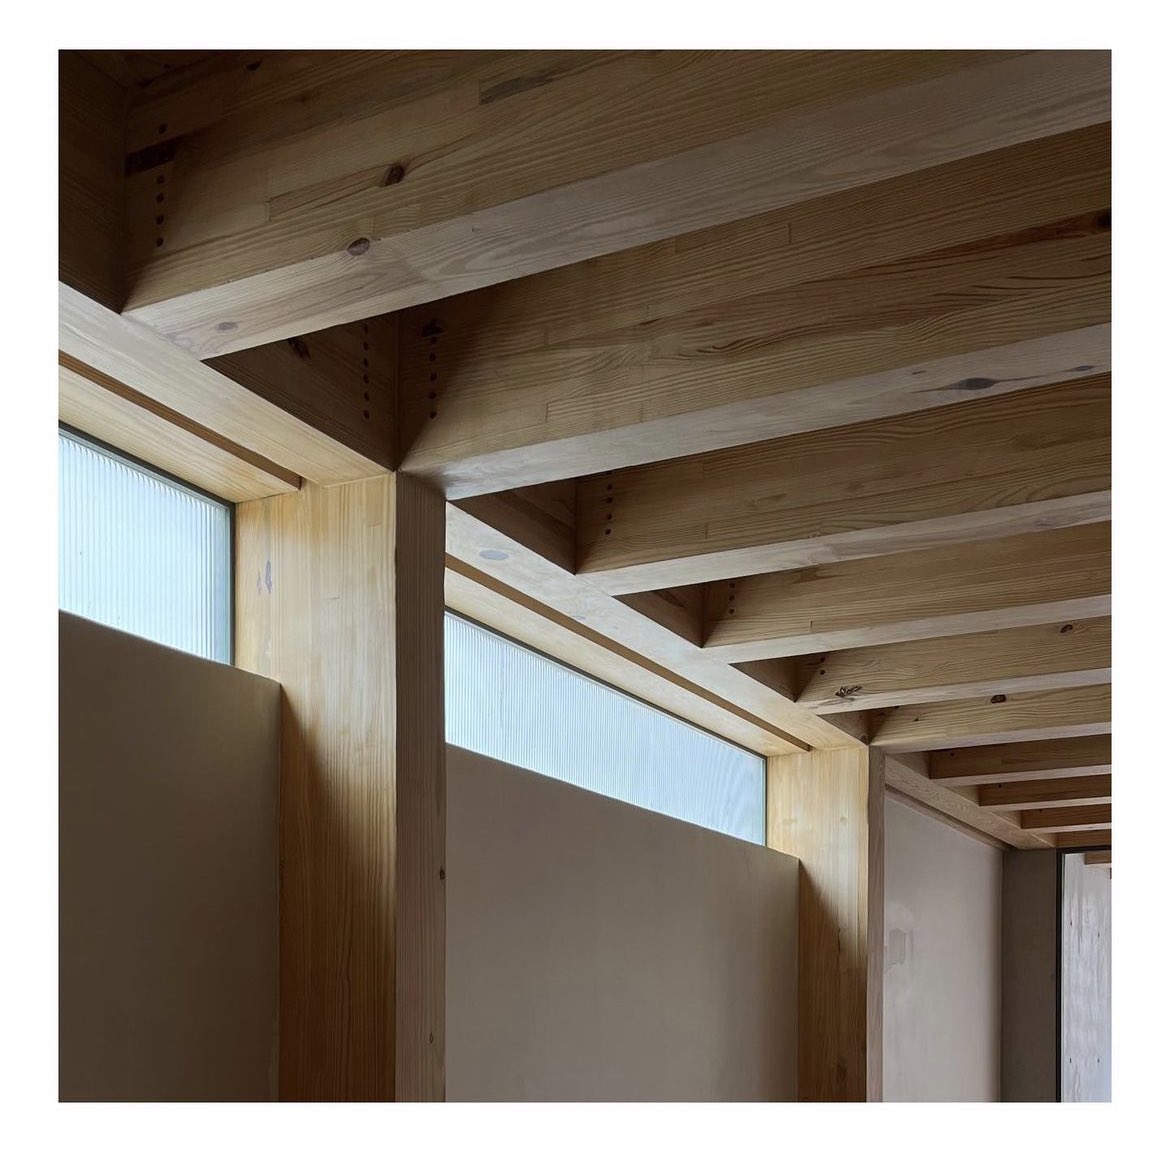 Beautifully detailed timber apartments under construction in Mexico 

By the always excellent Taller Hector Barroso